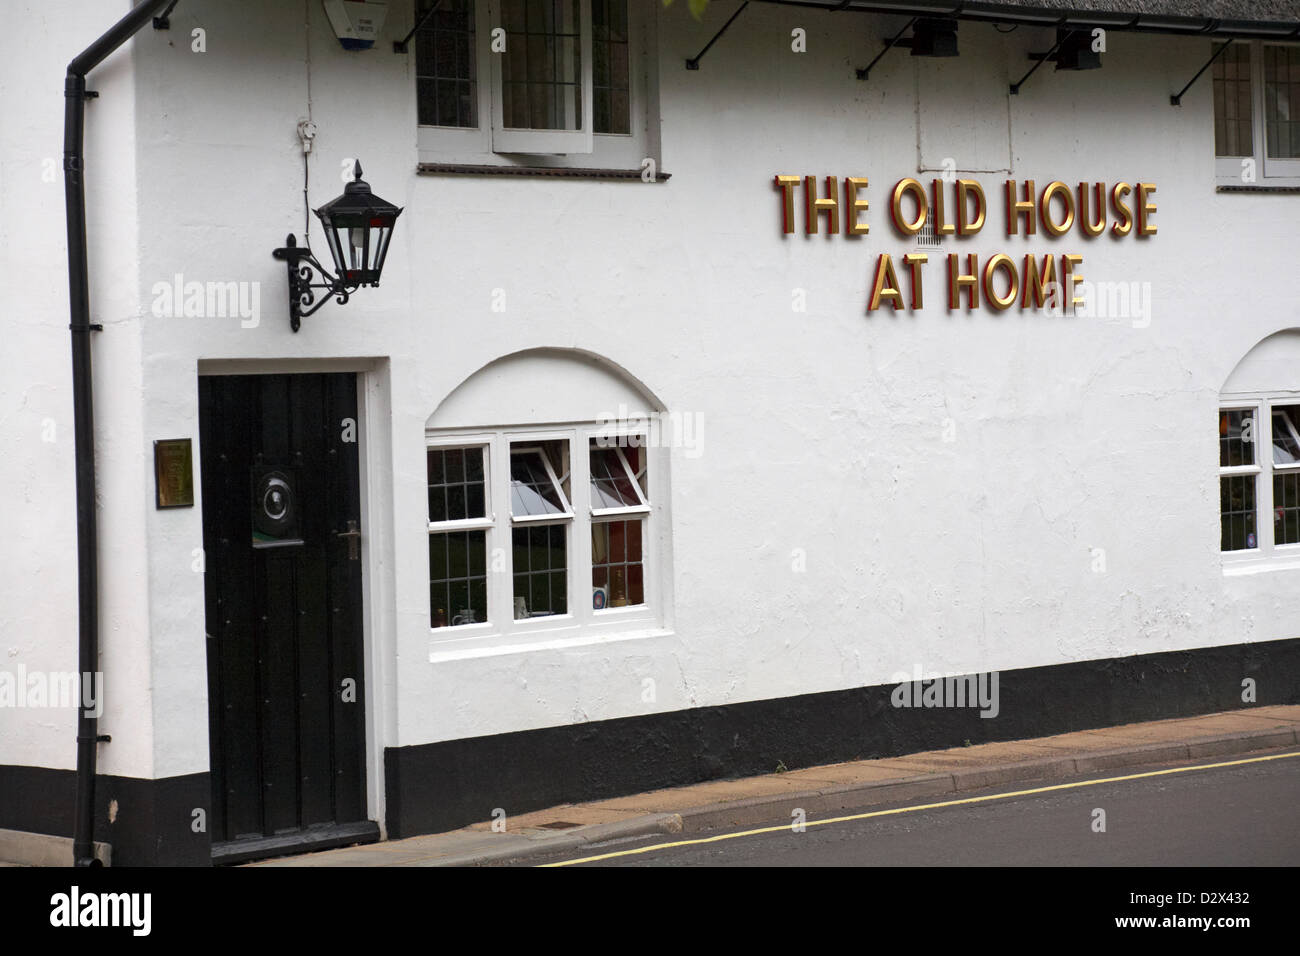 The Old House at Home Pub in Love Lane, Romsey, Hampshire, Großbritannien im August Stockfoto